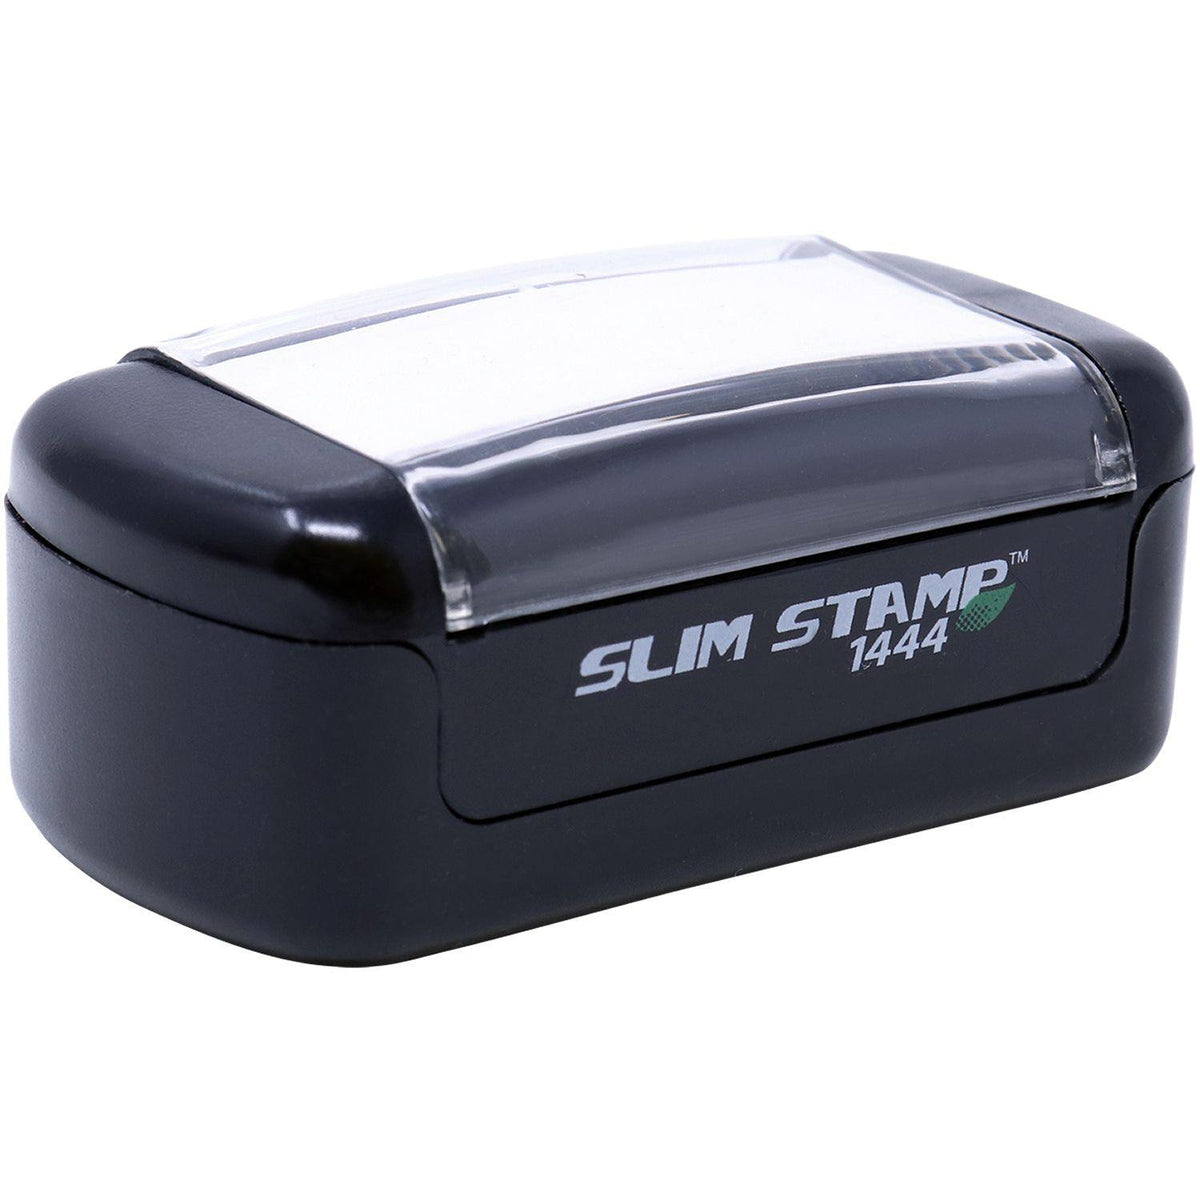 Alt View of Slim Pre Inked Preliminary As Built Stamp Mount Angle